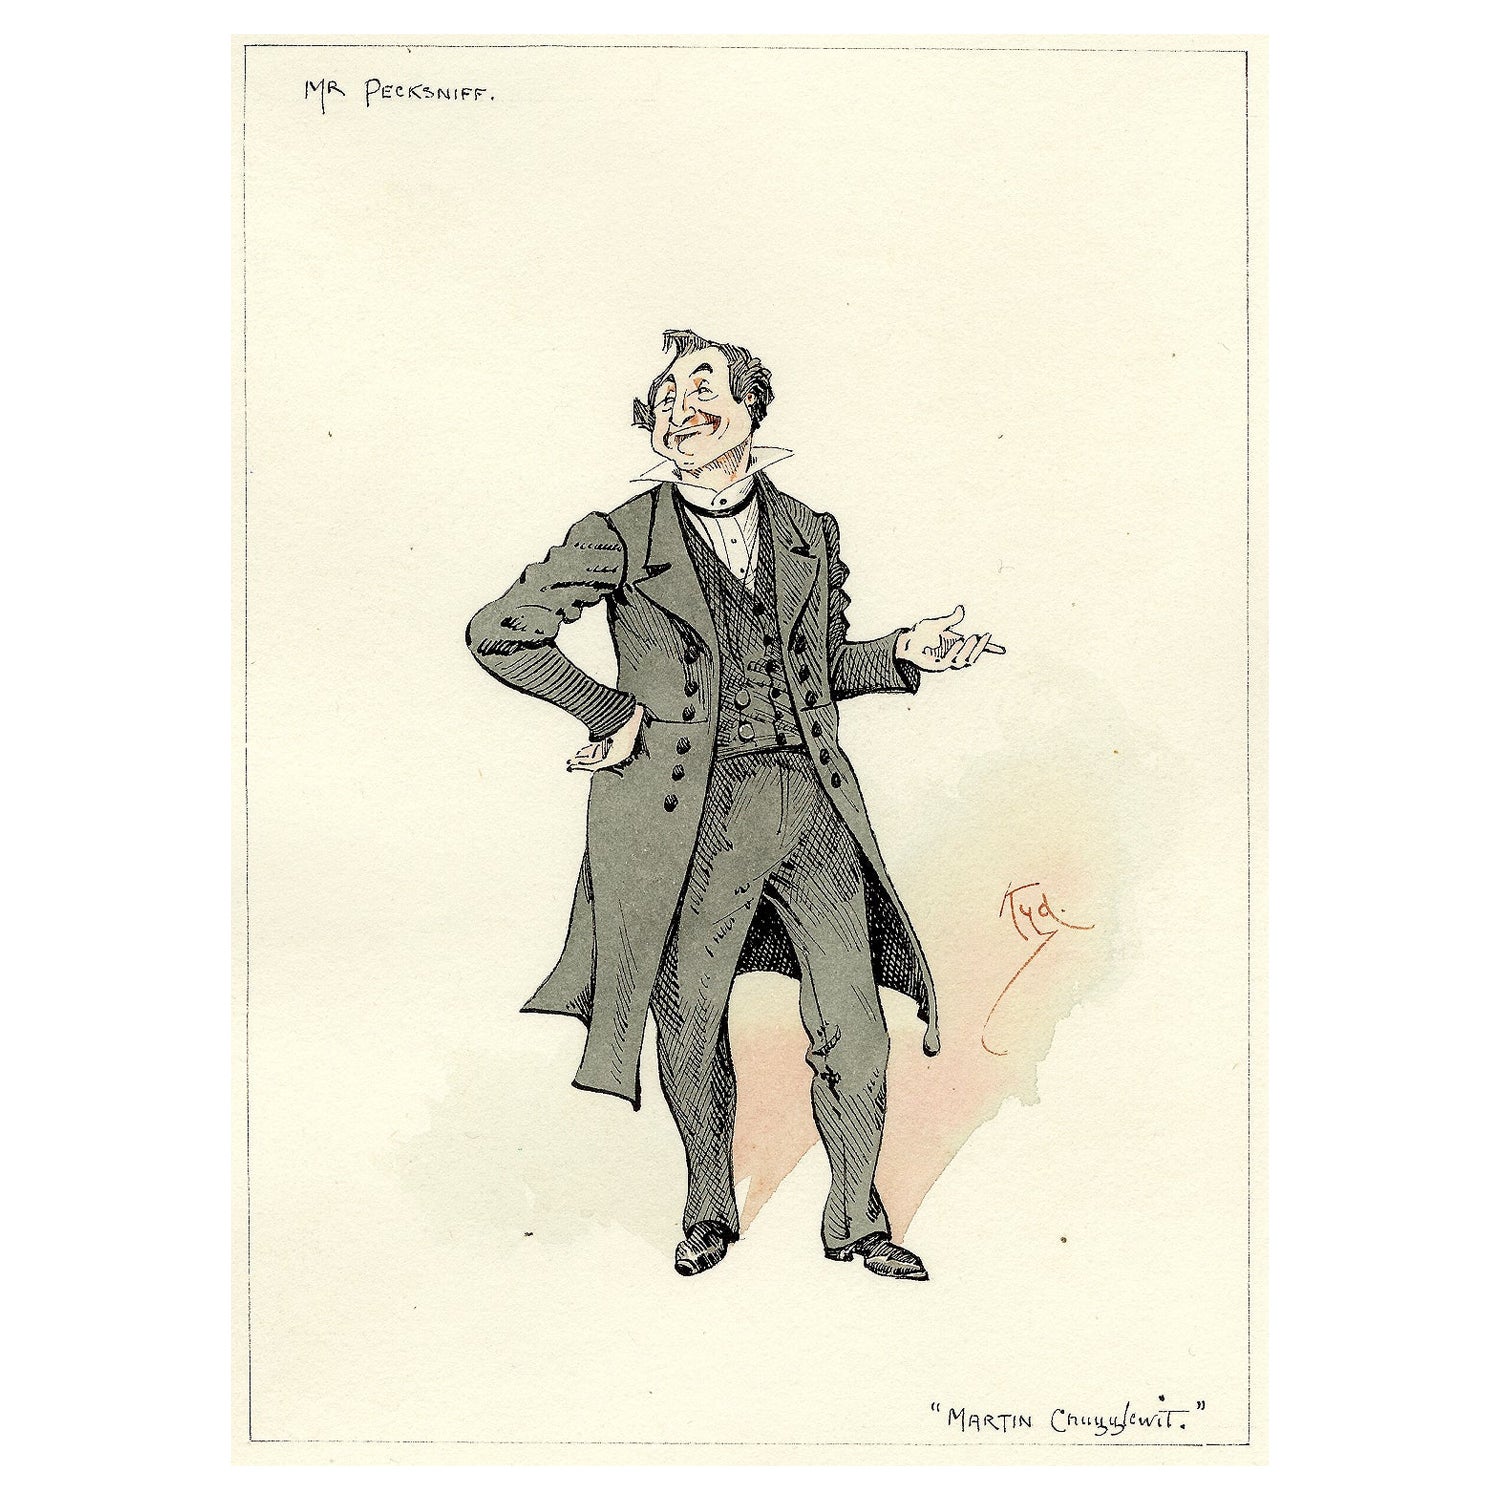 (KYD) - DICKENS - Mr. Pecksniff (from Martin Chuzzlewit) - ORIGINAL SKETCH For Sale